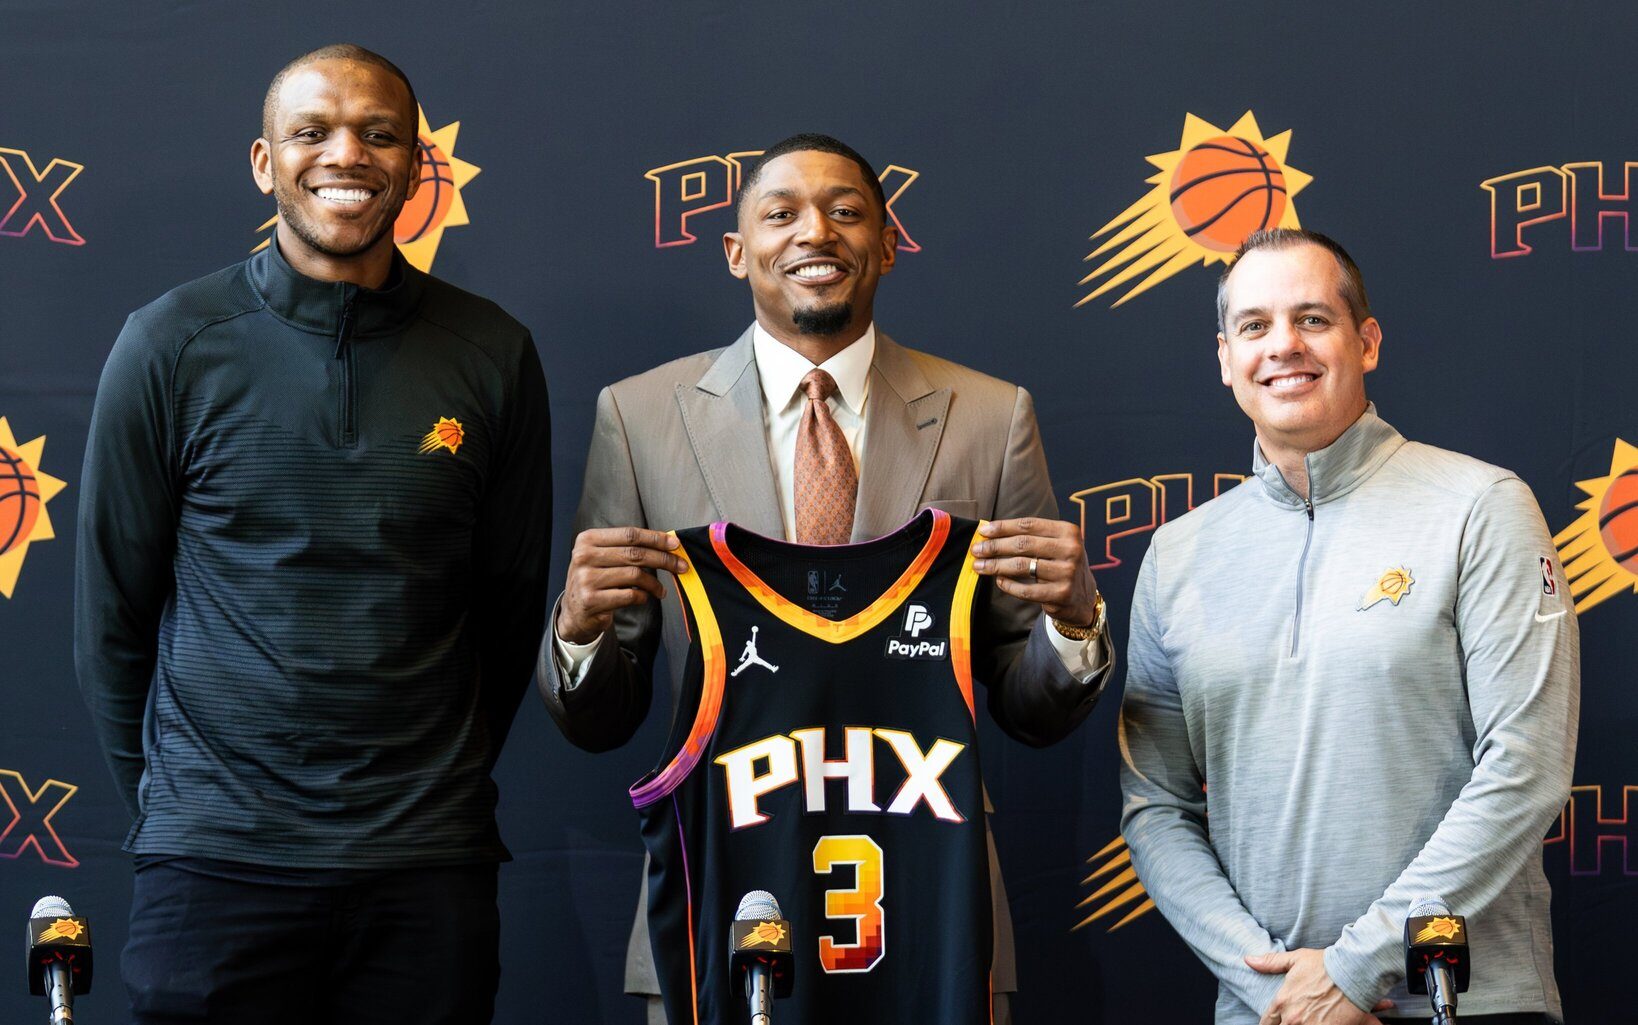 Suns become last NBA team to add G League franchise